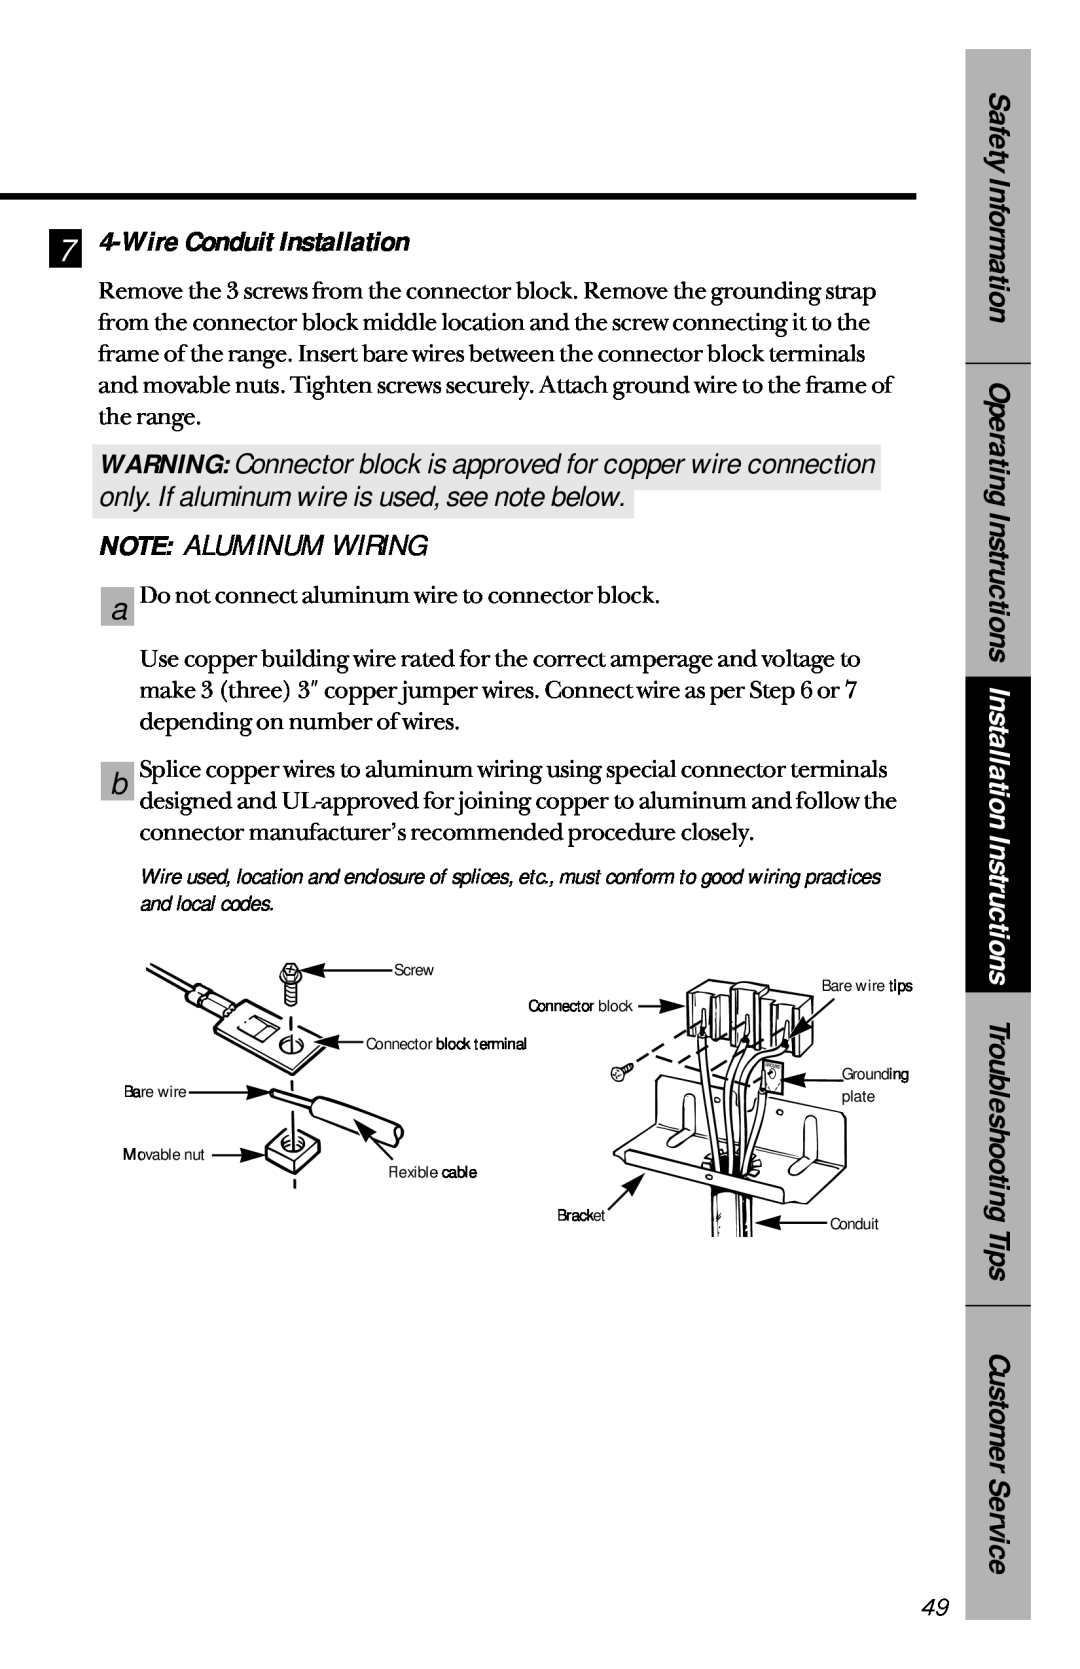 GE 164D3333P069, 49-8827 owner manual 7 4-WireConduit Installation, Note Aluminum Wiring 